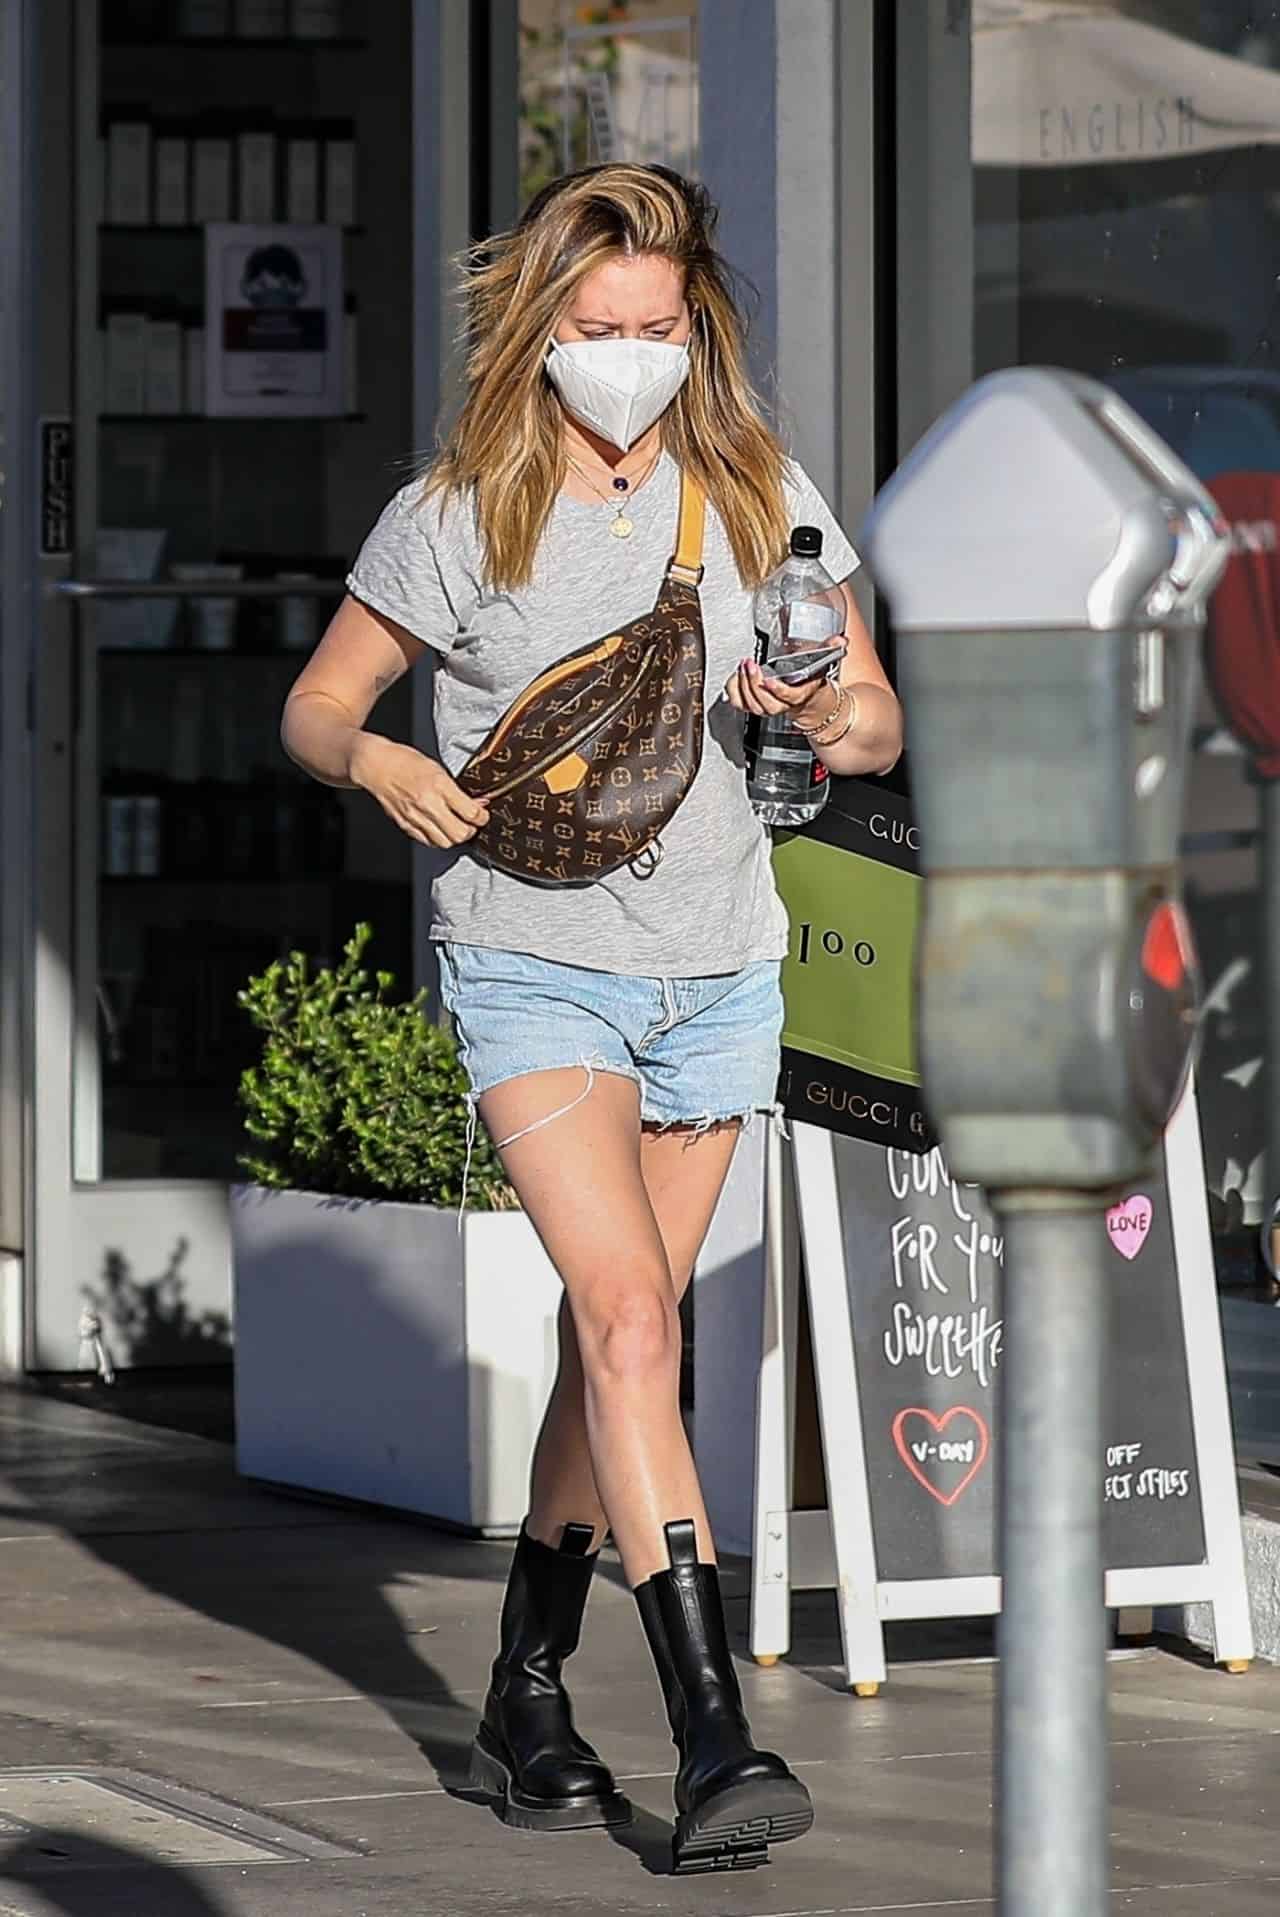 Ashley Tisdale Reveals Her Killer Legs in Denim Shorts on a Shopping Trip